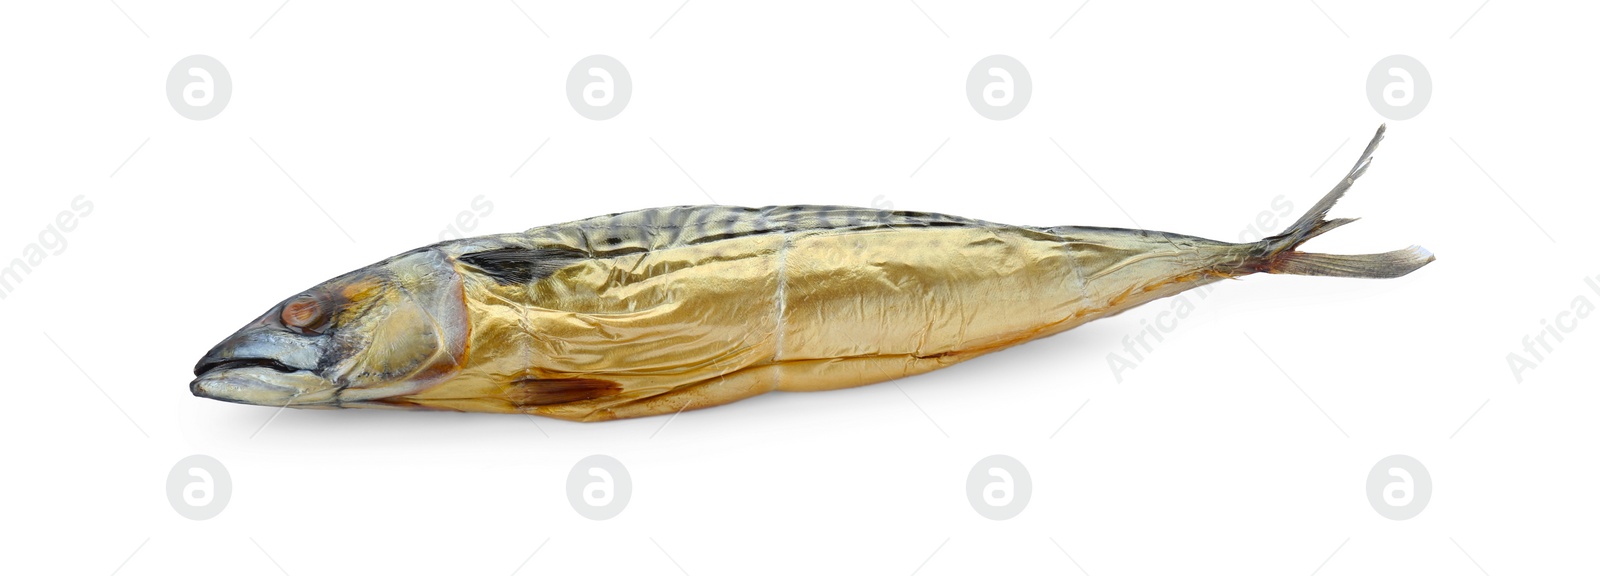 Photo of Delicious smoked mackerel isolated on white.
Seafood product